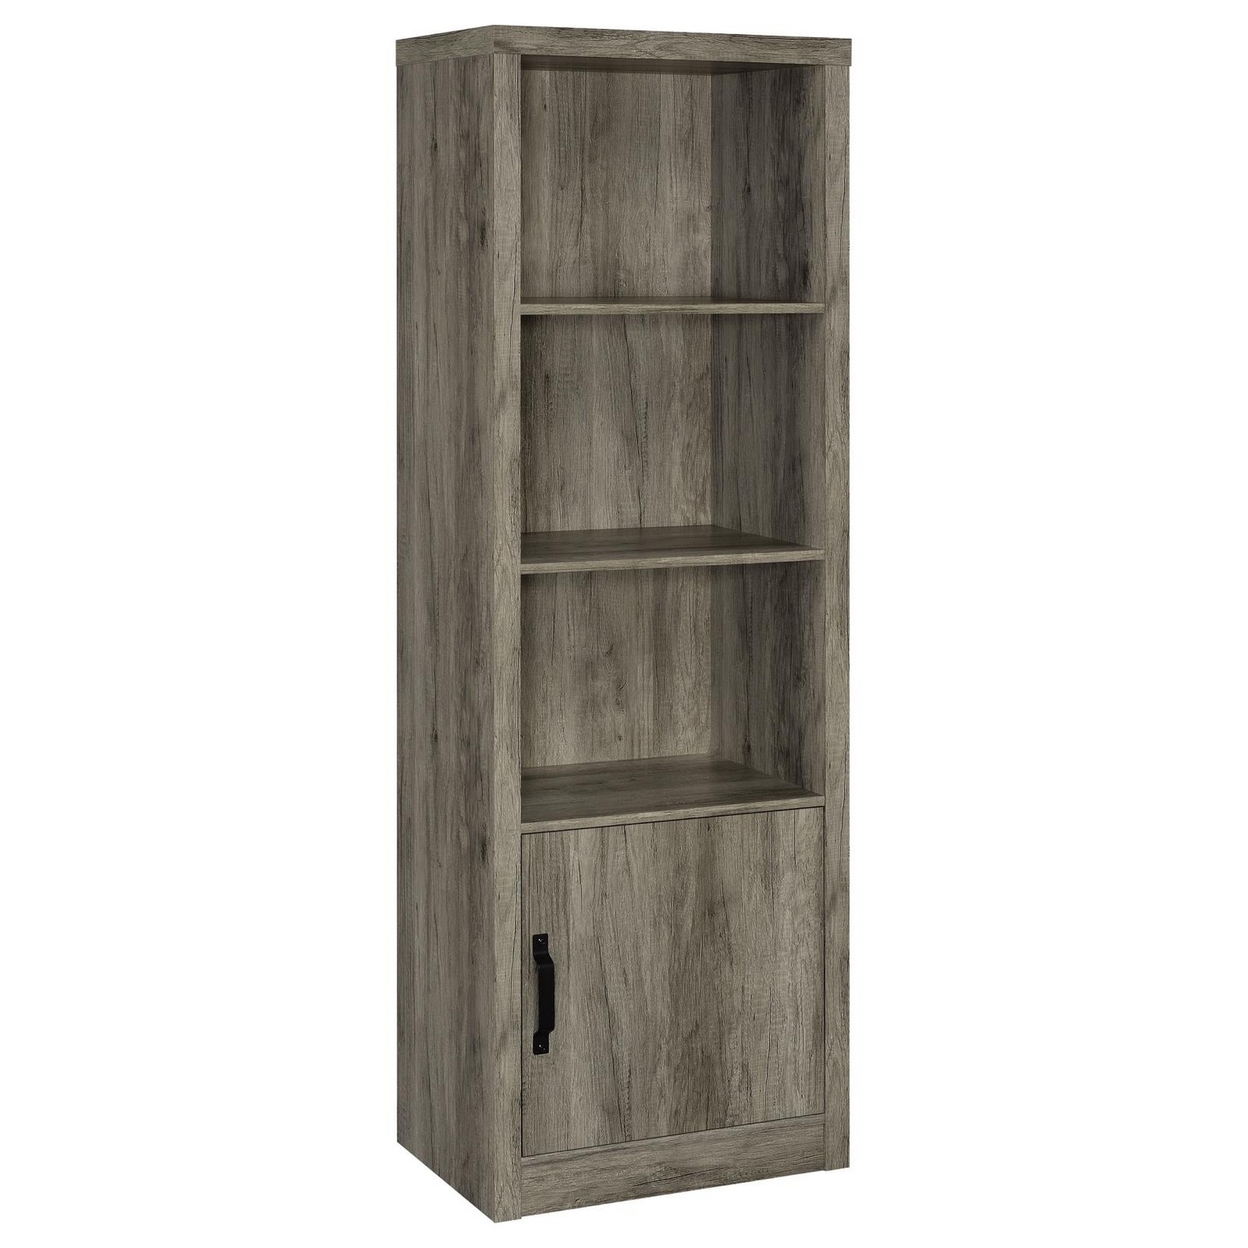 Sac 71 Inch Media Pier Tower With 3 Shelves And Single Cabinet, Gray Wood -Saltoro Sherpi